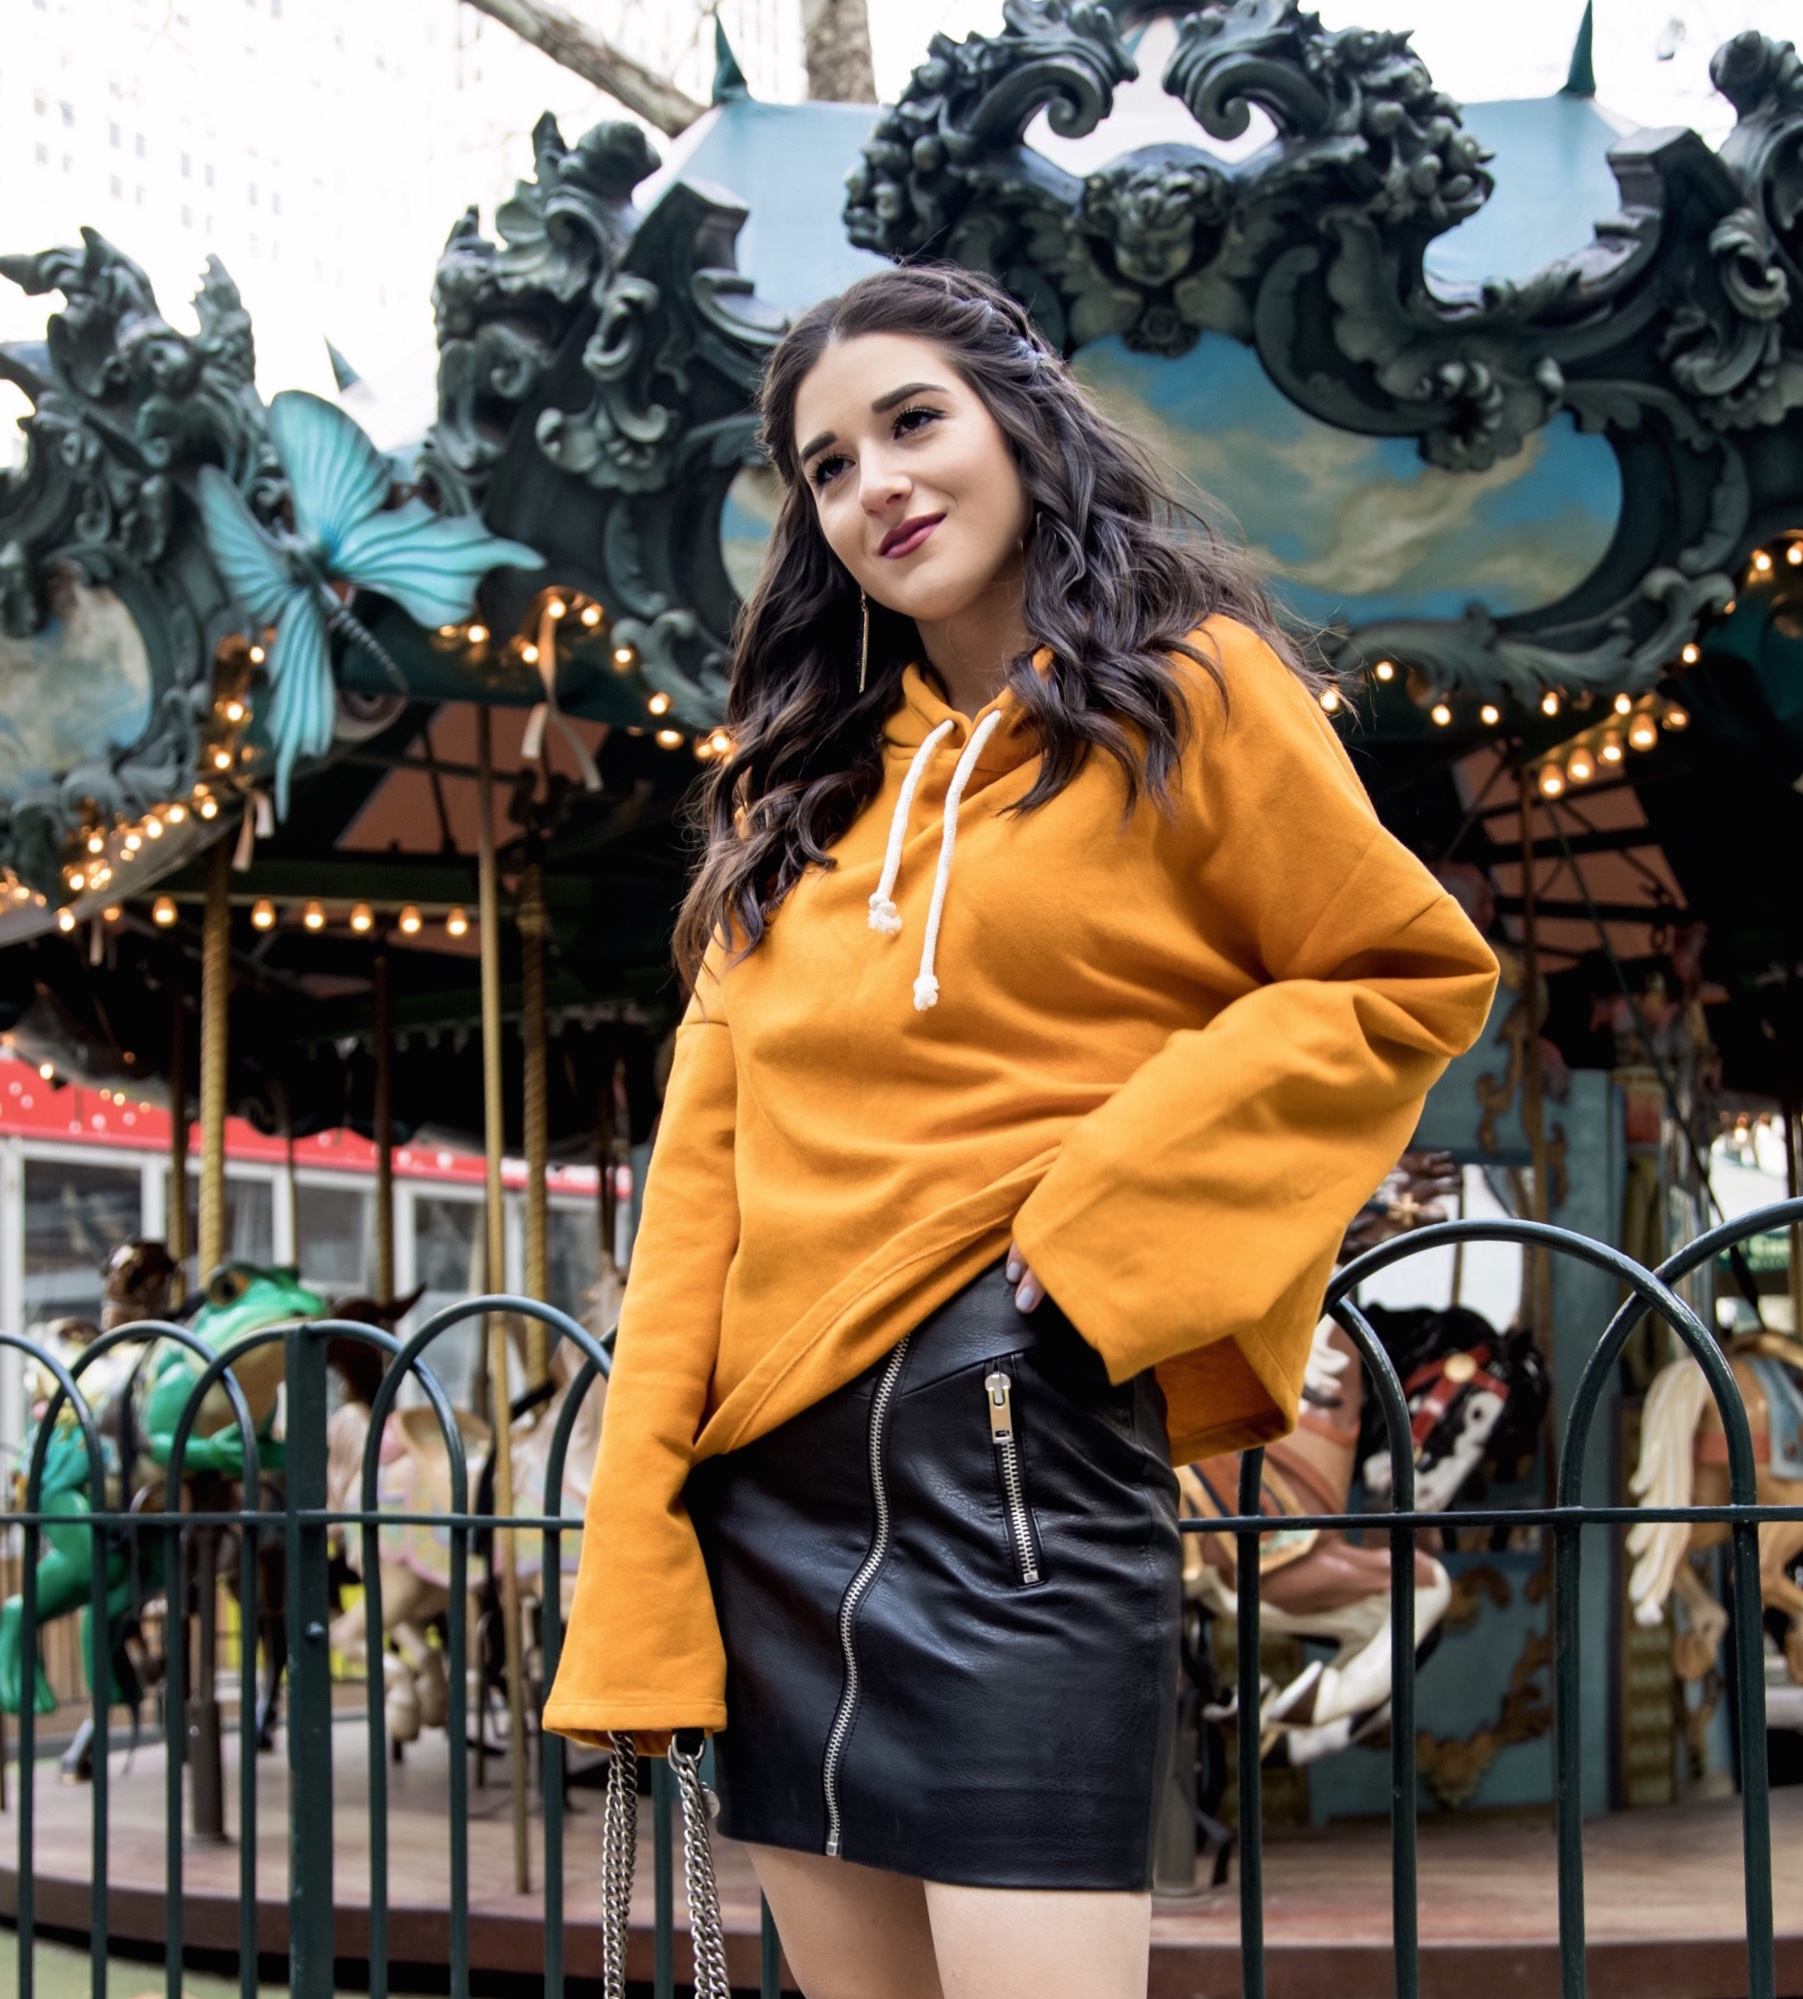 How+Blogging+Affected+My+Self+Confidence+Yellow+Sweatshirt+Black+Pleather+Skirt+Esther+Santer+Fashion+Blog+NYC+Street+Style+Blogger+Outfit+OOTD+Trendy+Zara+ASOS+Hairstyle+Sporty+Girly+Open+Toe+Booties++Shopping+Buy+Wear+Fall+Winter+Hood+Mustard+Color.jpg